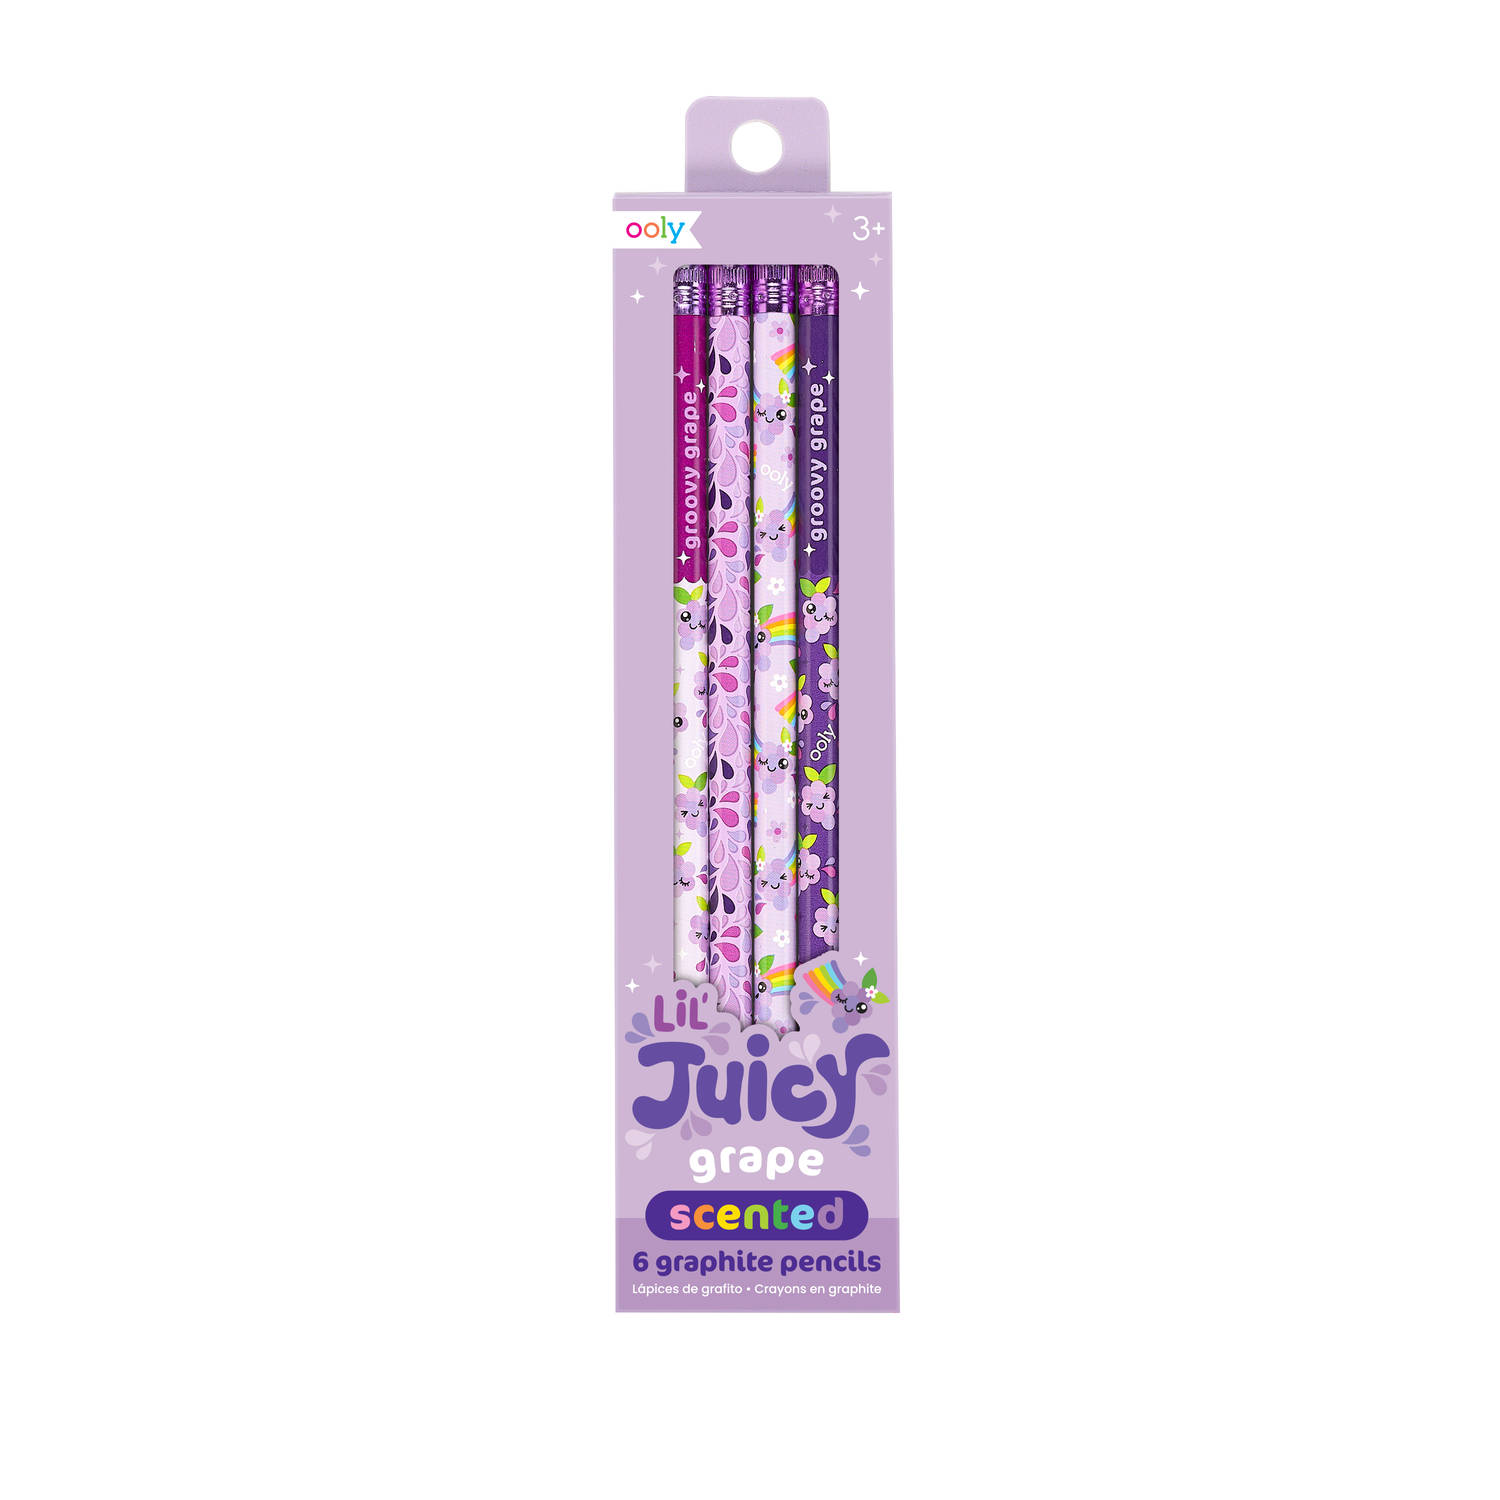 Ooly - Lil Juicy Scented Graphite Pencils - Grape